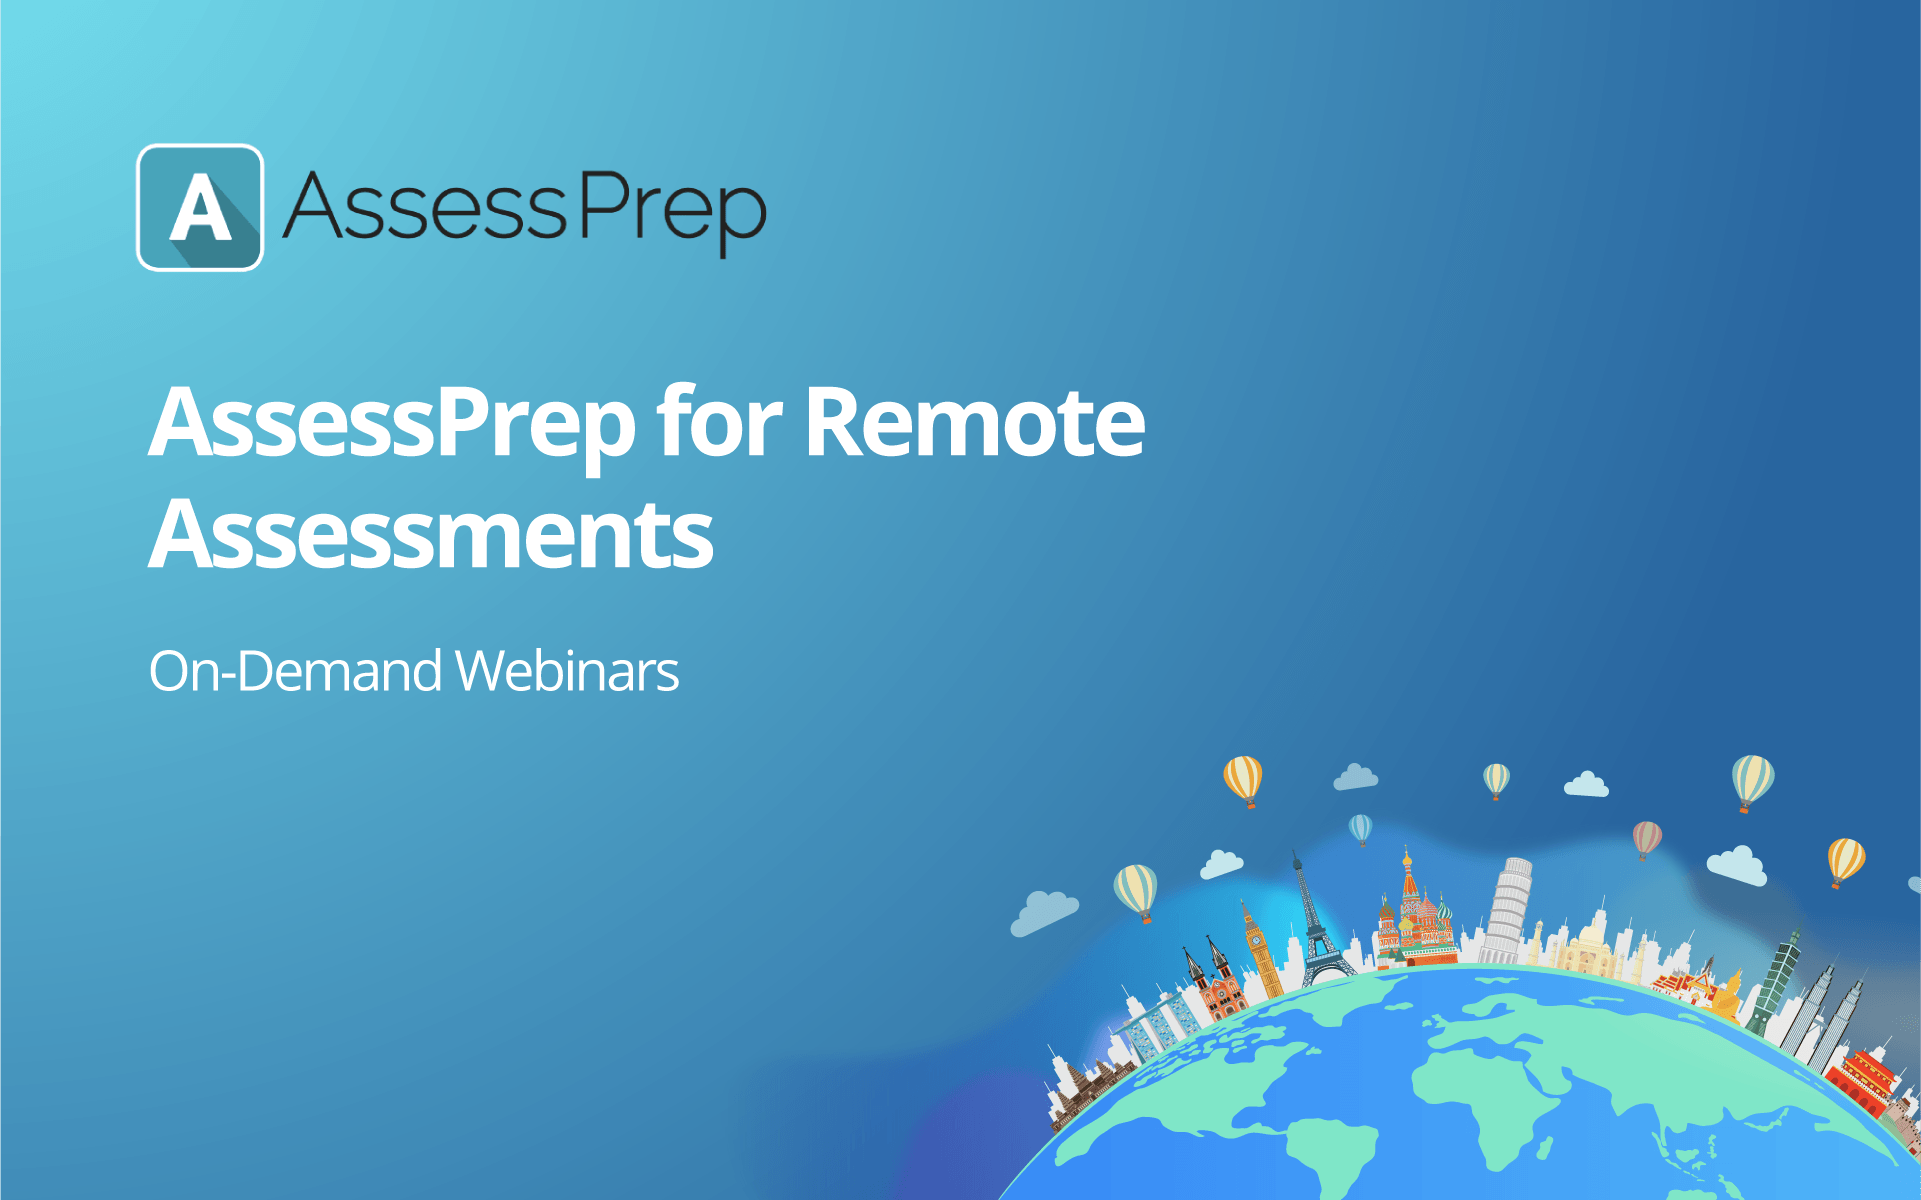 AssessPrep for Remote Assessments